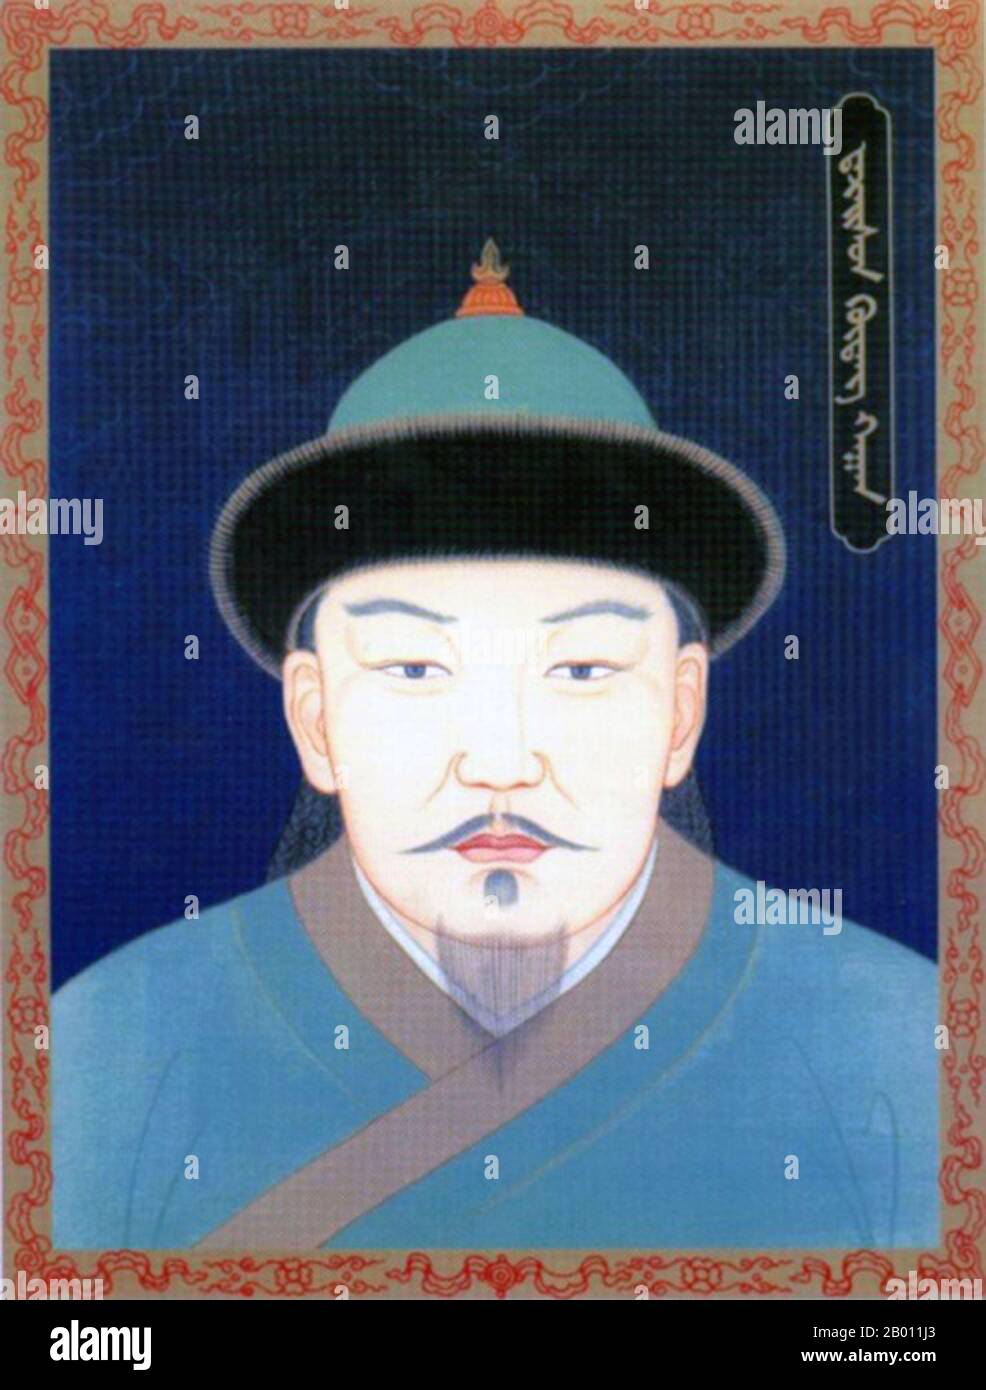 Mongolia: Darayisung Khan, Khagan of the Northern Yuan Dynasty (r. 1547-1557), 20th century.  Darayisung (Darayisun) Khan (1520-1557), was a Mongol khan of the Northern Yuan Dynasty in Mongolia. Darayisung Khan was the eldest son of Bodi Alagh Khan whom he succeeded as khan. During his rule, Altan Khan became stronger and more disrespectful of the power of the Great Khan and Darayisung Khan was unable to achieve victory in their conflicts. Altan Khan forced Darayisung Küdeng Khan to flee eastward, and in 1551 Darayisung compromised to submit to Altan and grant him the title of Gegeen Khan. Stock Photo